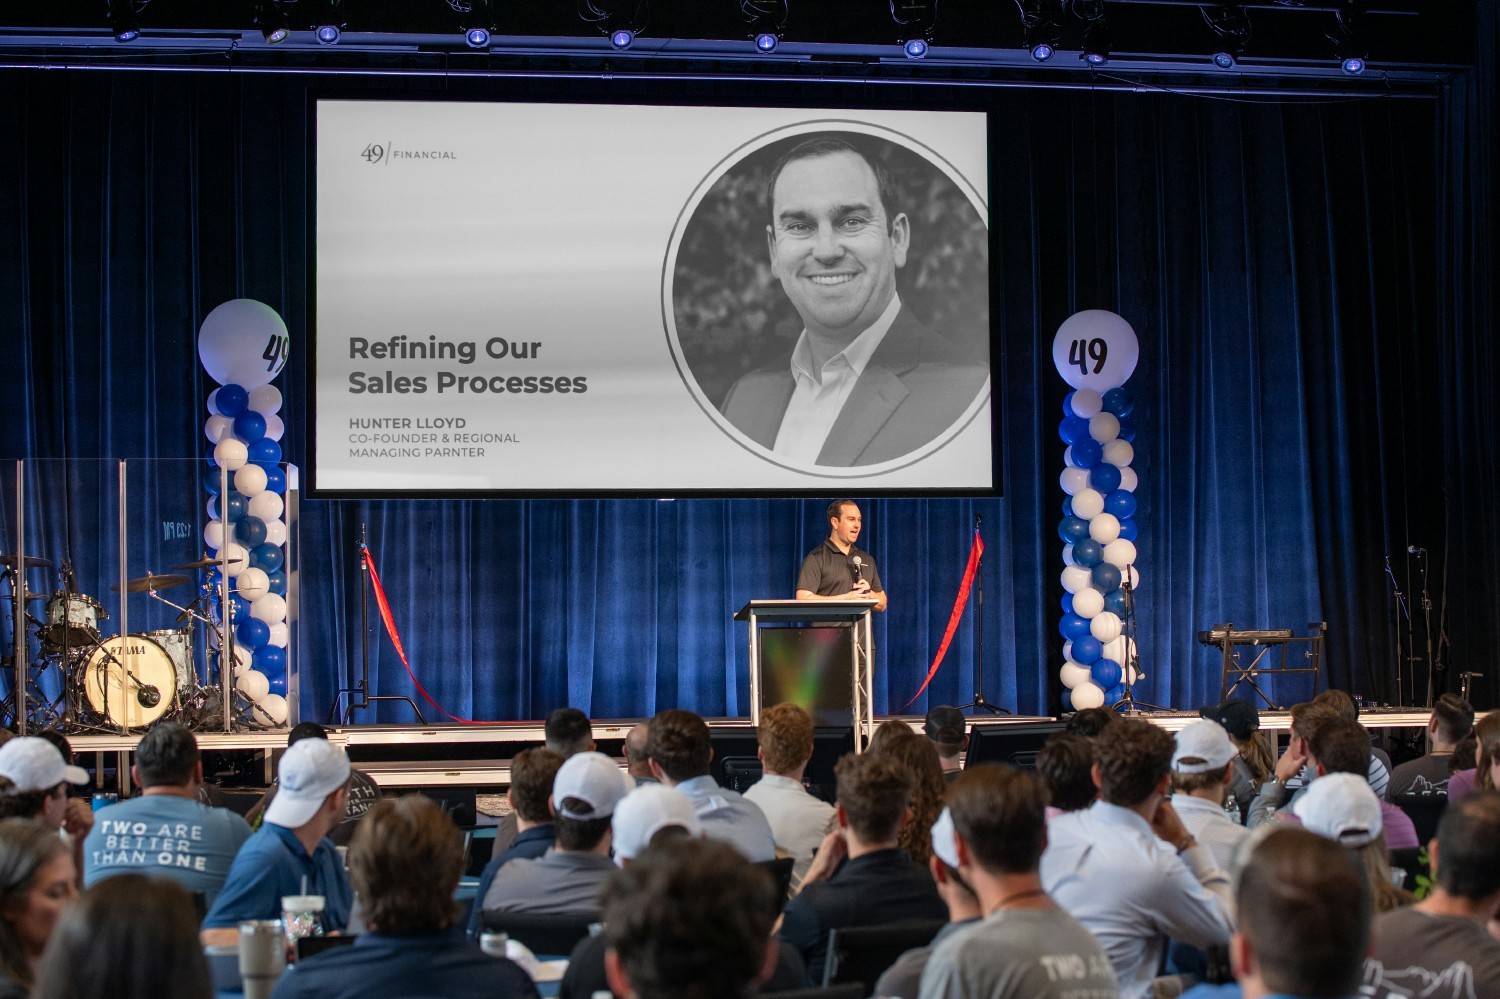 “One of our Co-Founders, Hunter Lloyd, speaking at our annual SUMMIT conference about firm updates.”